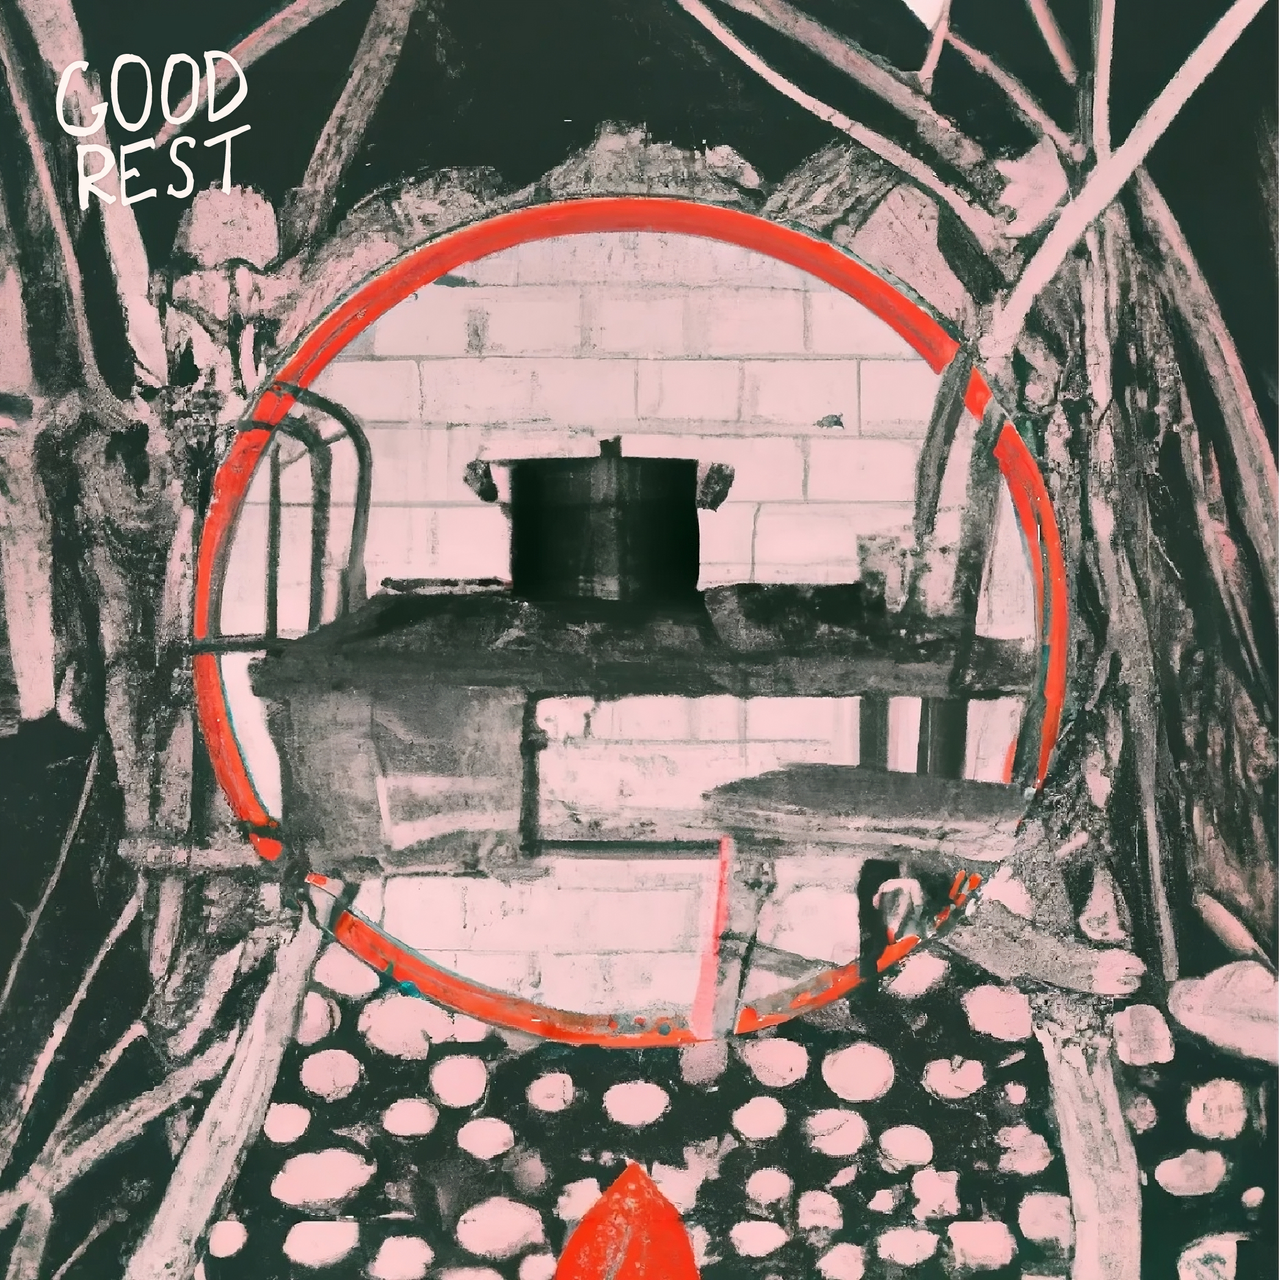 Family Recipe cover art - an old kitchen with two chairs and a stove, surrounded by a black border with white tree roots. Charcoal drawing style collage.